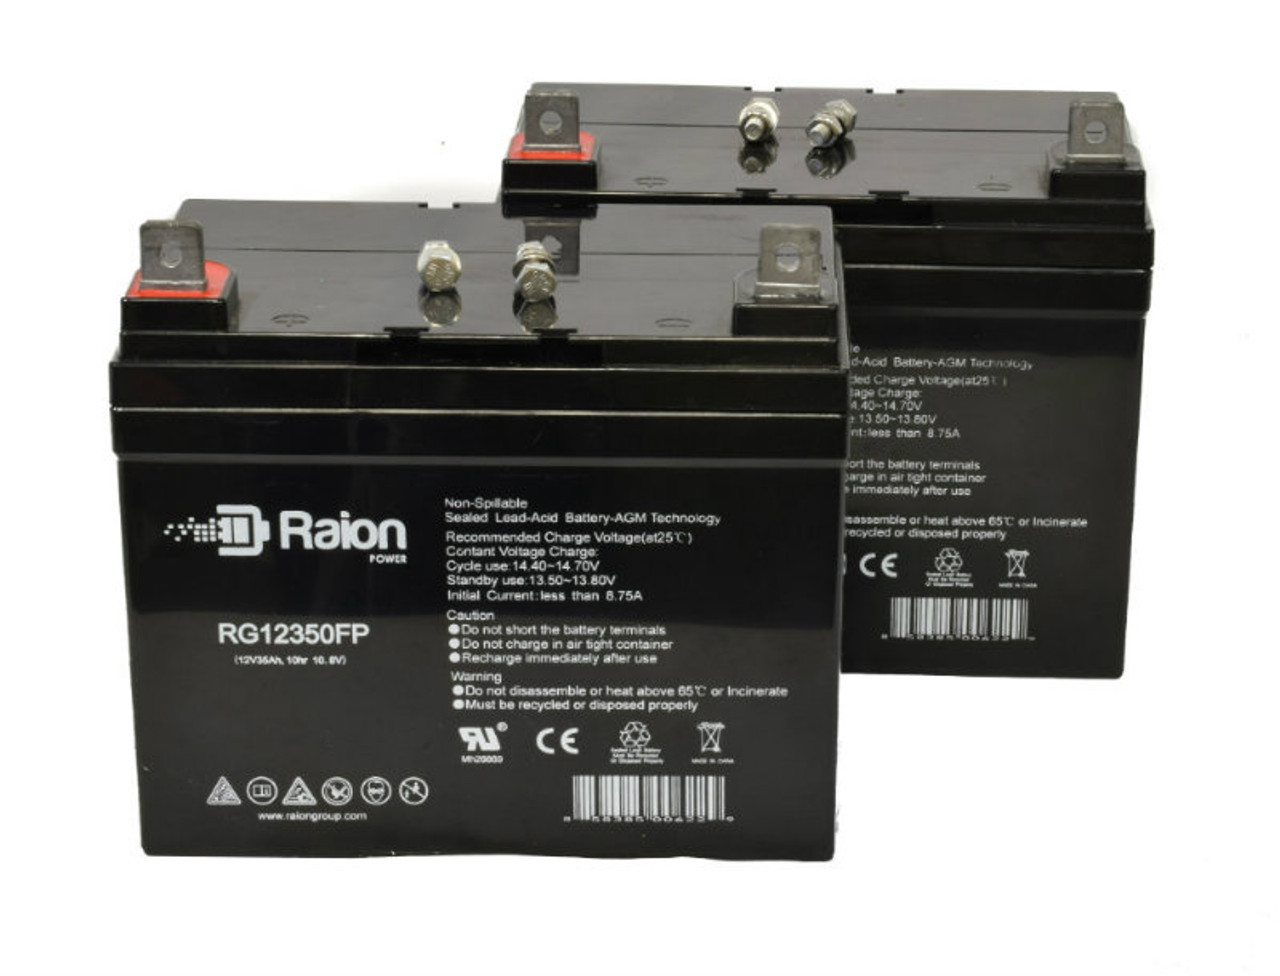 Raion Power Replacement 12V 35Ah Lawn Mower Battery for Dixon 4422 - 2 Pack